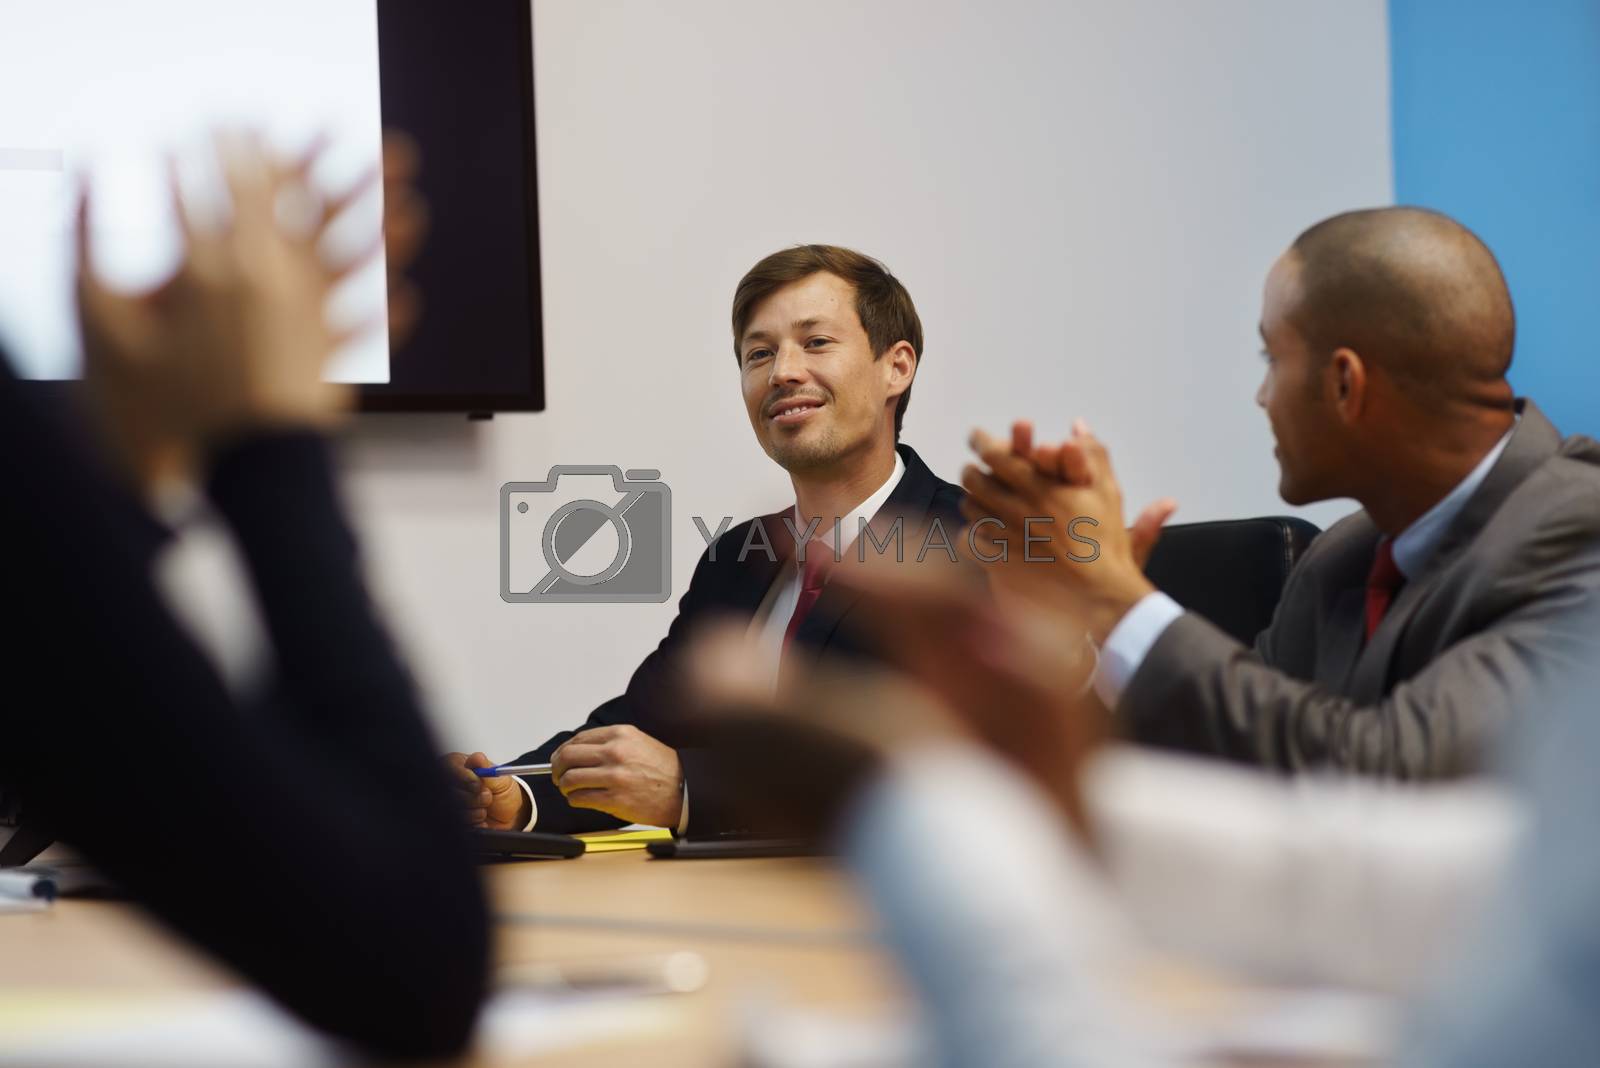 Royalty free image of Business Man Doing Presentation And People Applauding In Meeting by diego_cervo